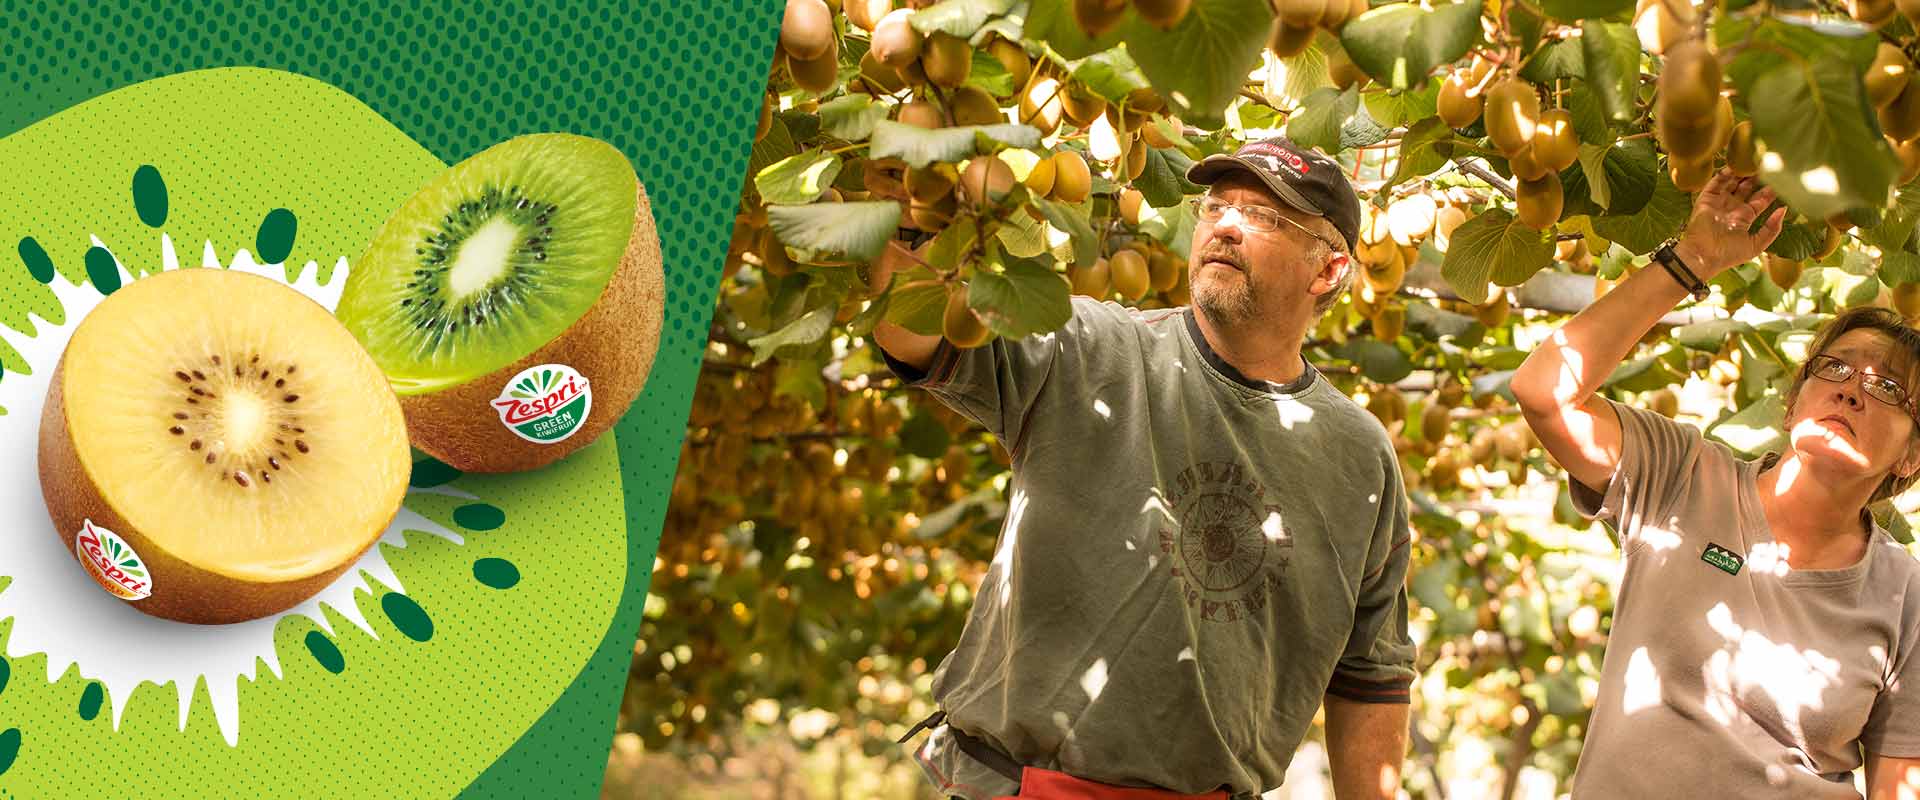 Who we are, what we do and why: 4 fascinating facts about Zespri™